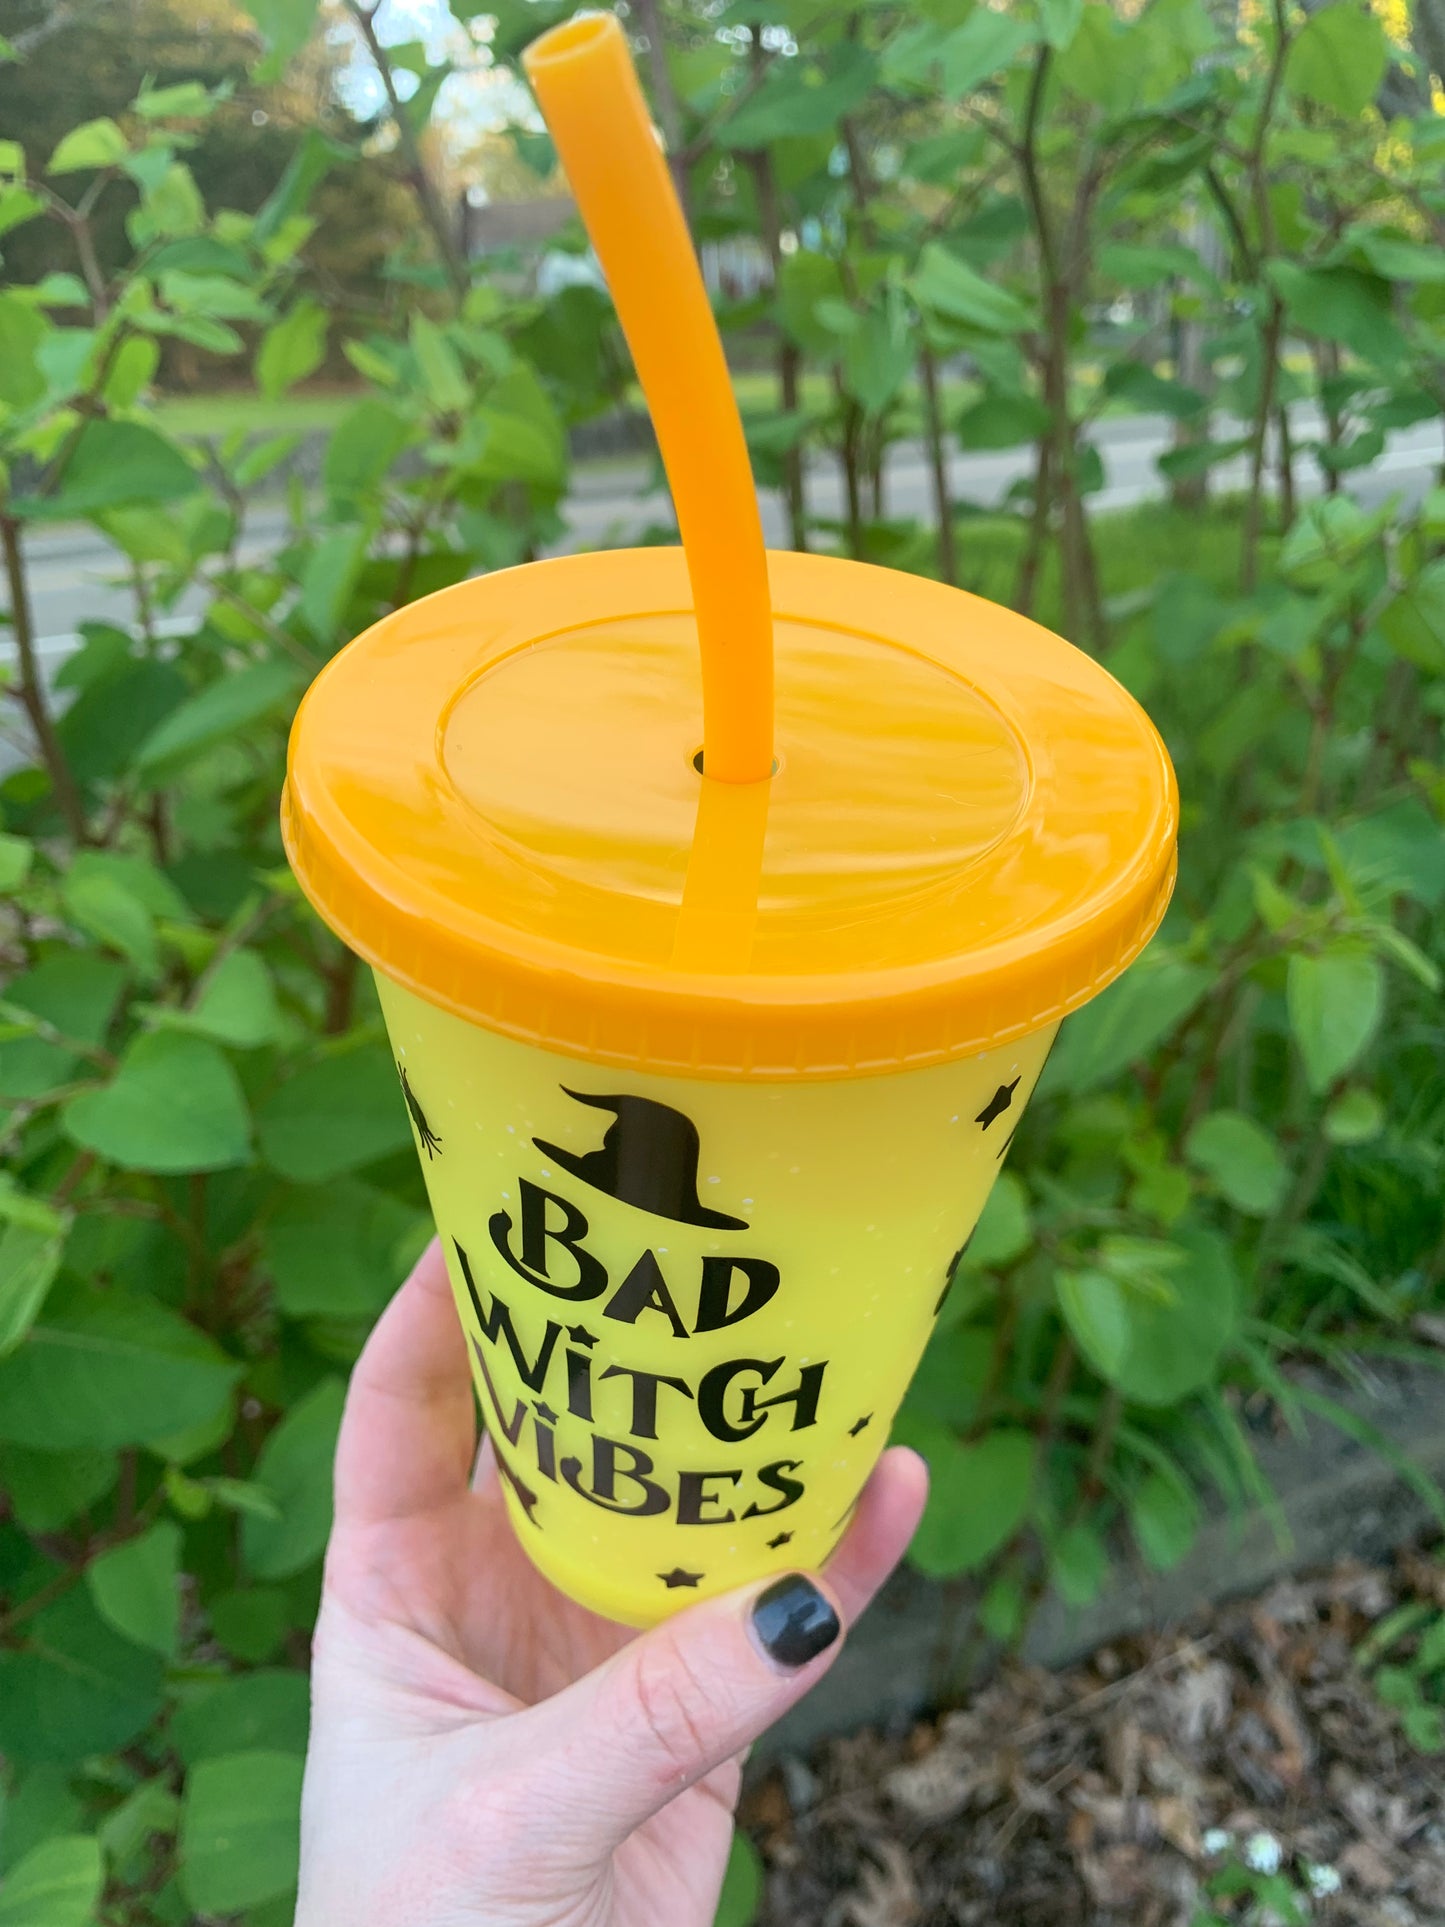 Bad Witch Vibes Tumbler